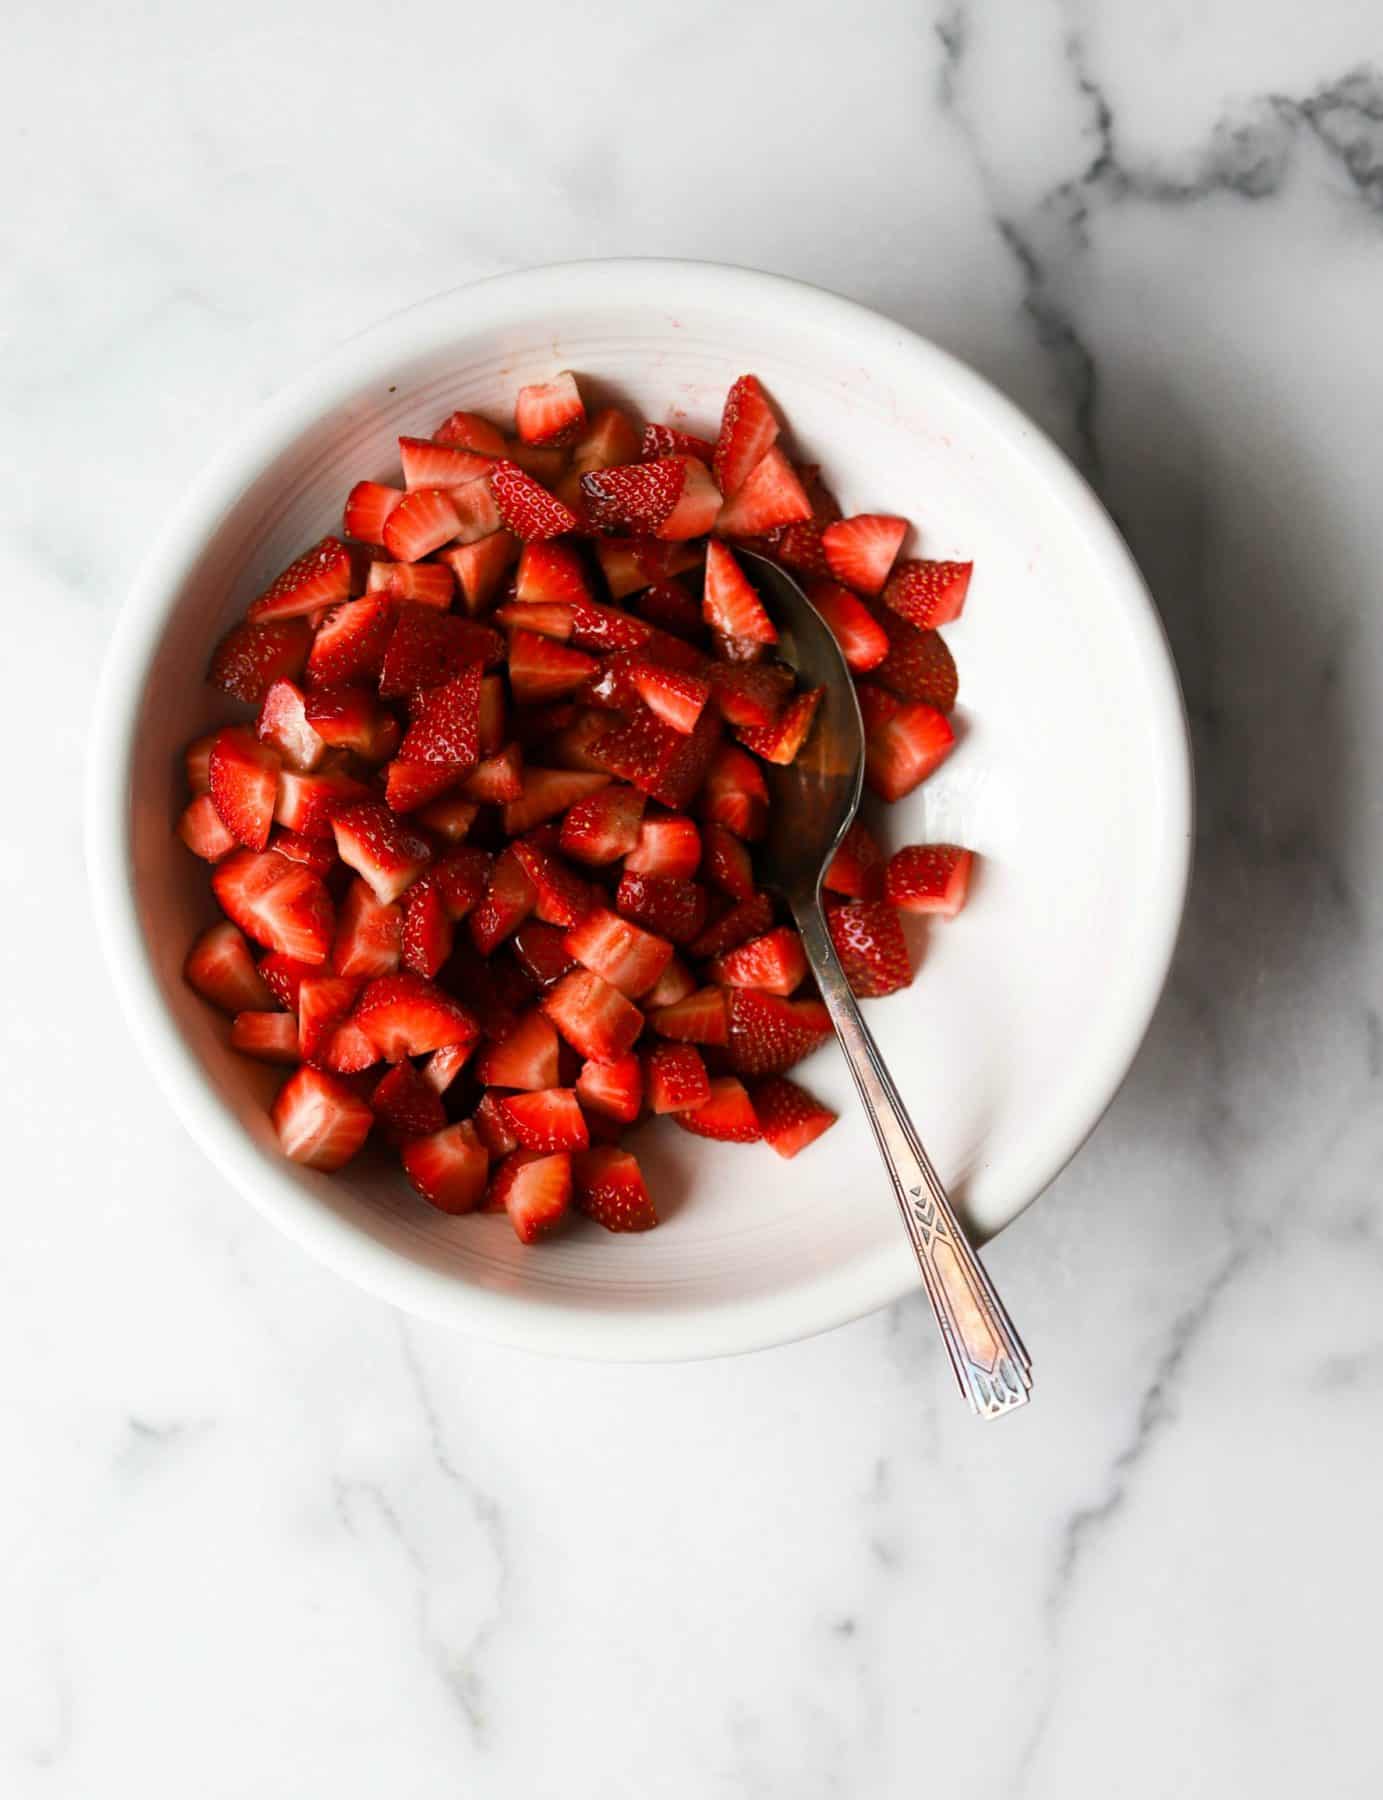 Chopped strawberries in a white bowl